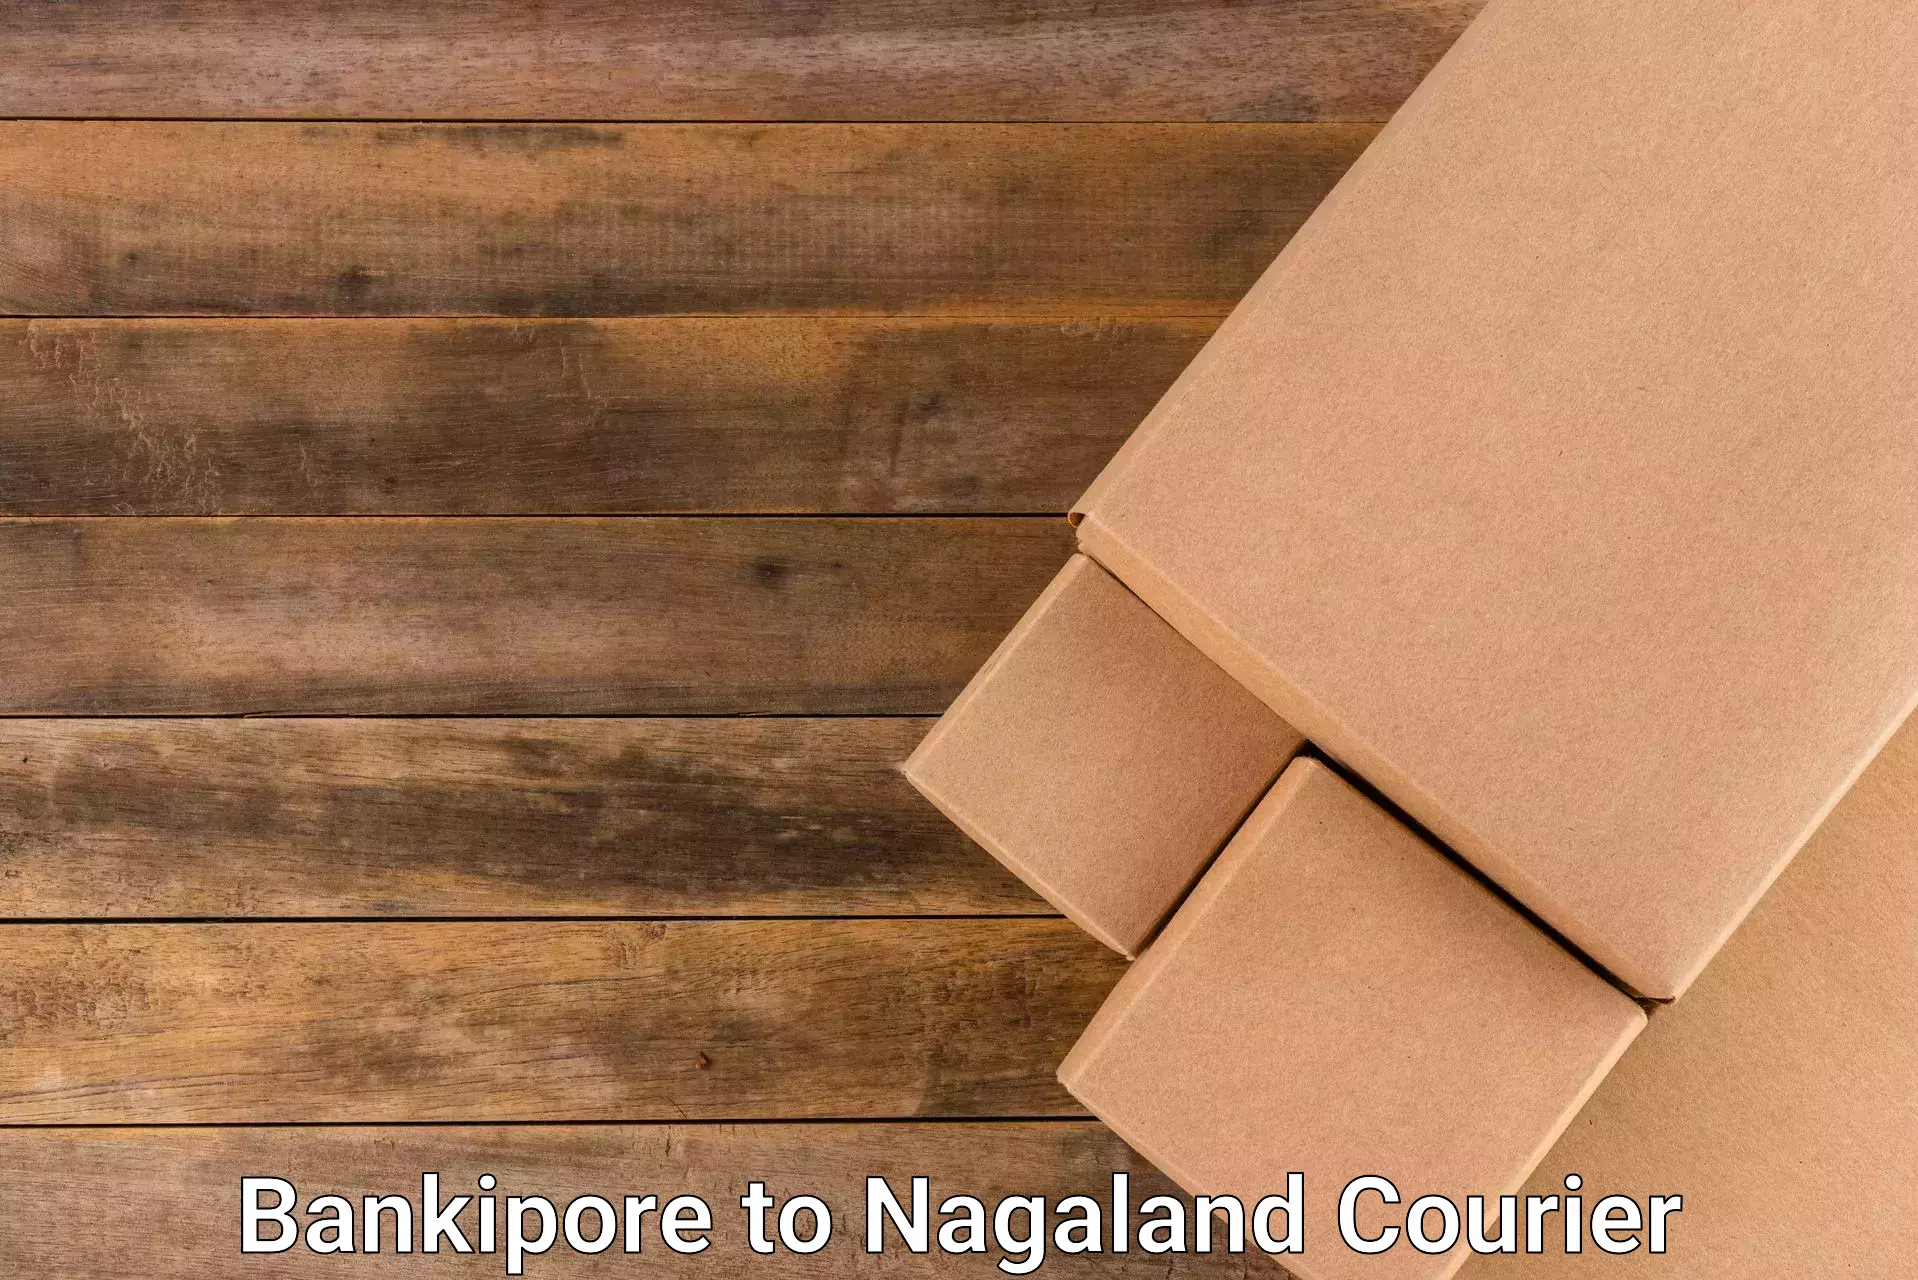 Multi-national courier services Bankipore to Dimapur